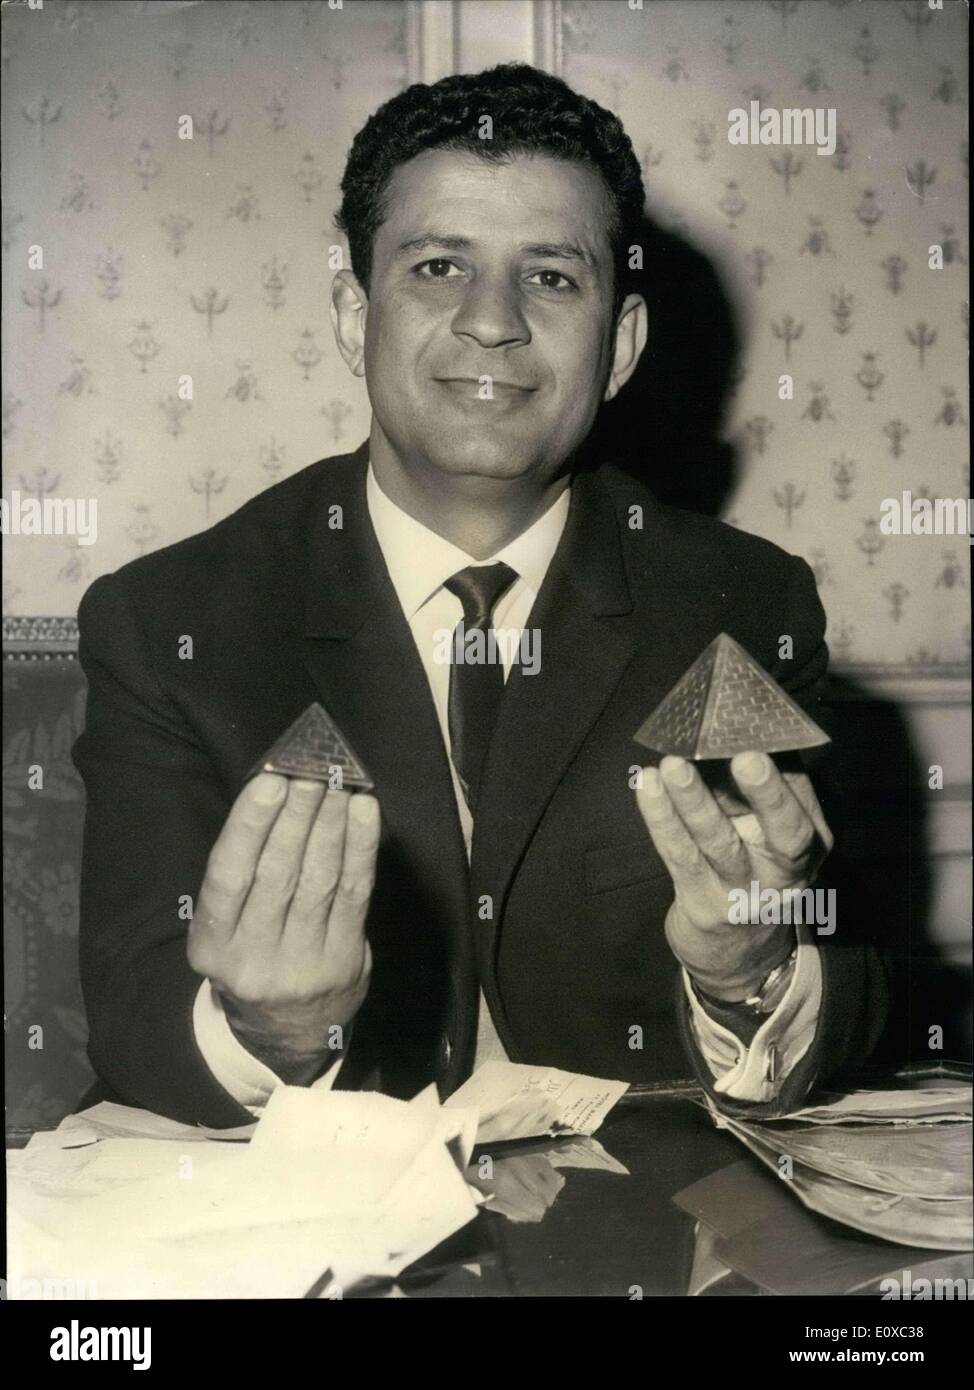 Mar. 18, 1966 - Israeli peace pilot in paris: Israeli ''peace pilots abie Nathan who flew to Egypt with ''peace offers'' for Nasser, is now in paris. Said Abie: ''I hope general De Gaulle will agree to grant me an interview''. Photo shows ''place pilot'' pictured in lhis paris Hotel. The two miniatures pyramids he is showing are a gift he received in port Said. Stock Photo